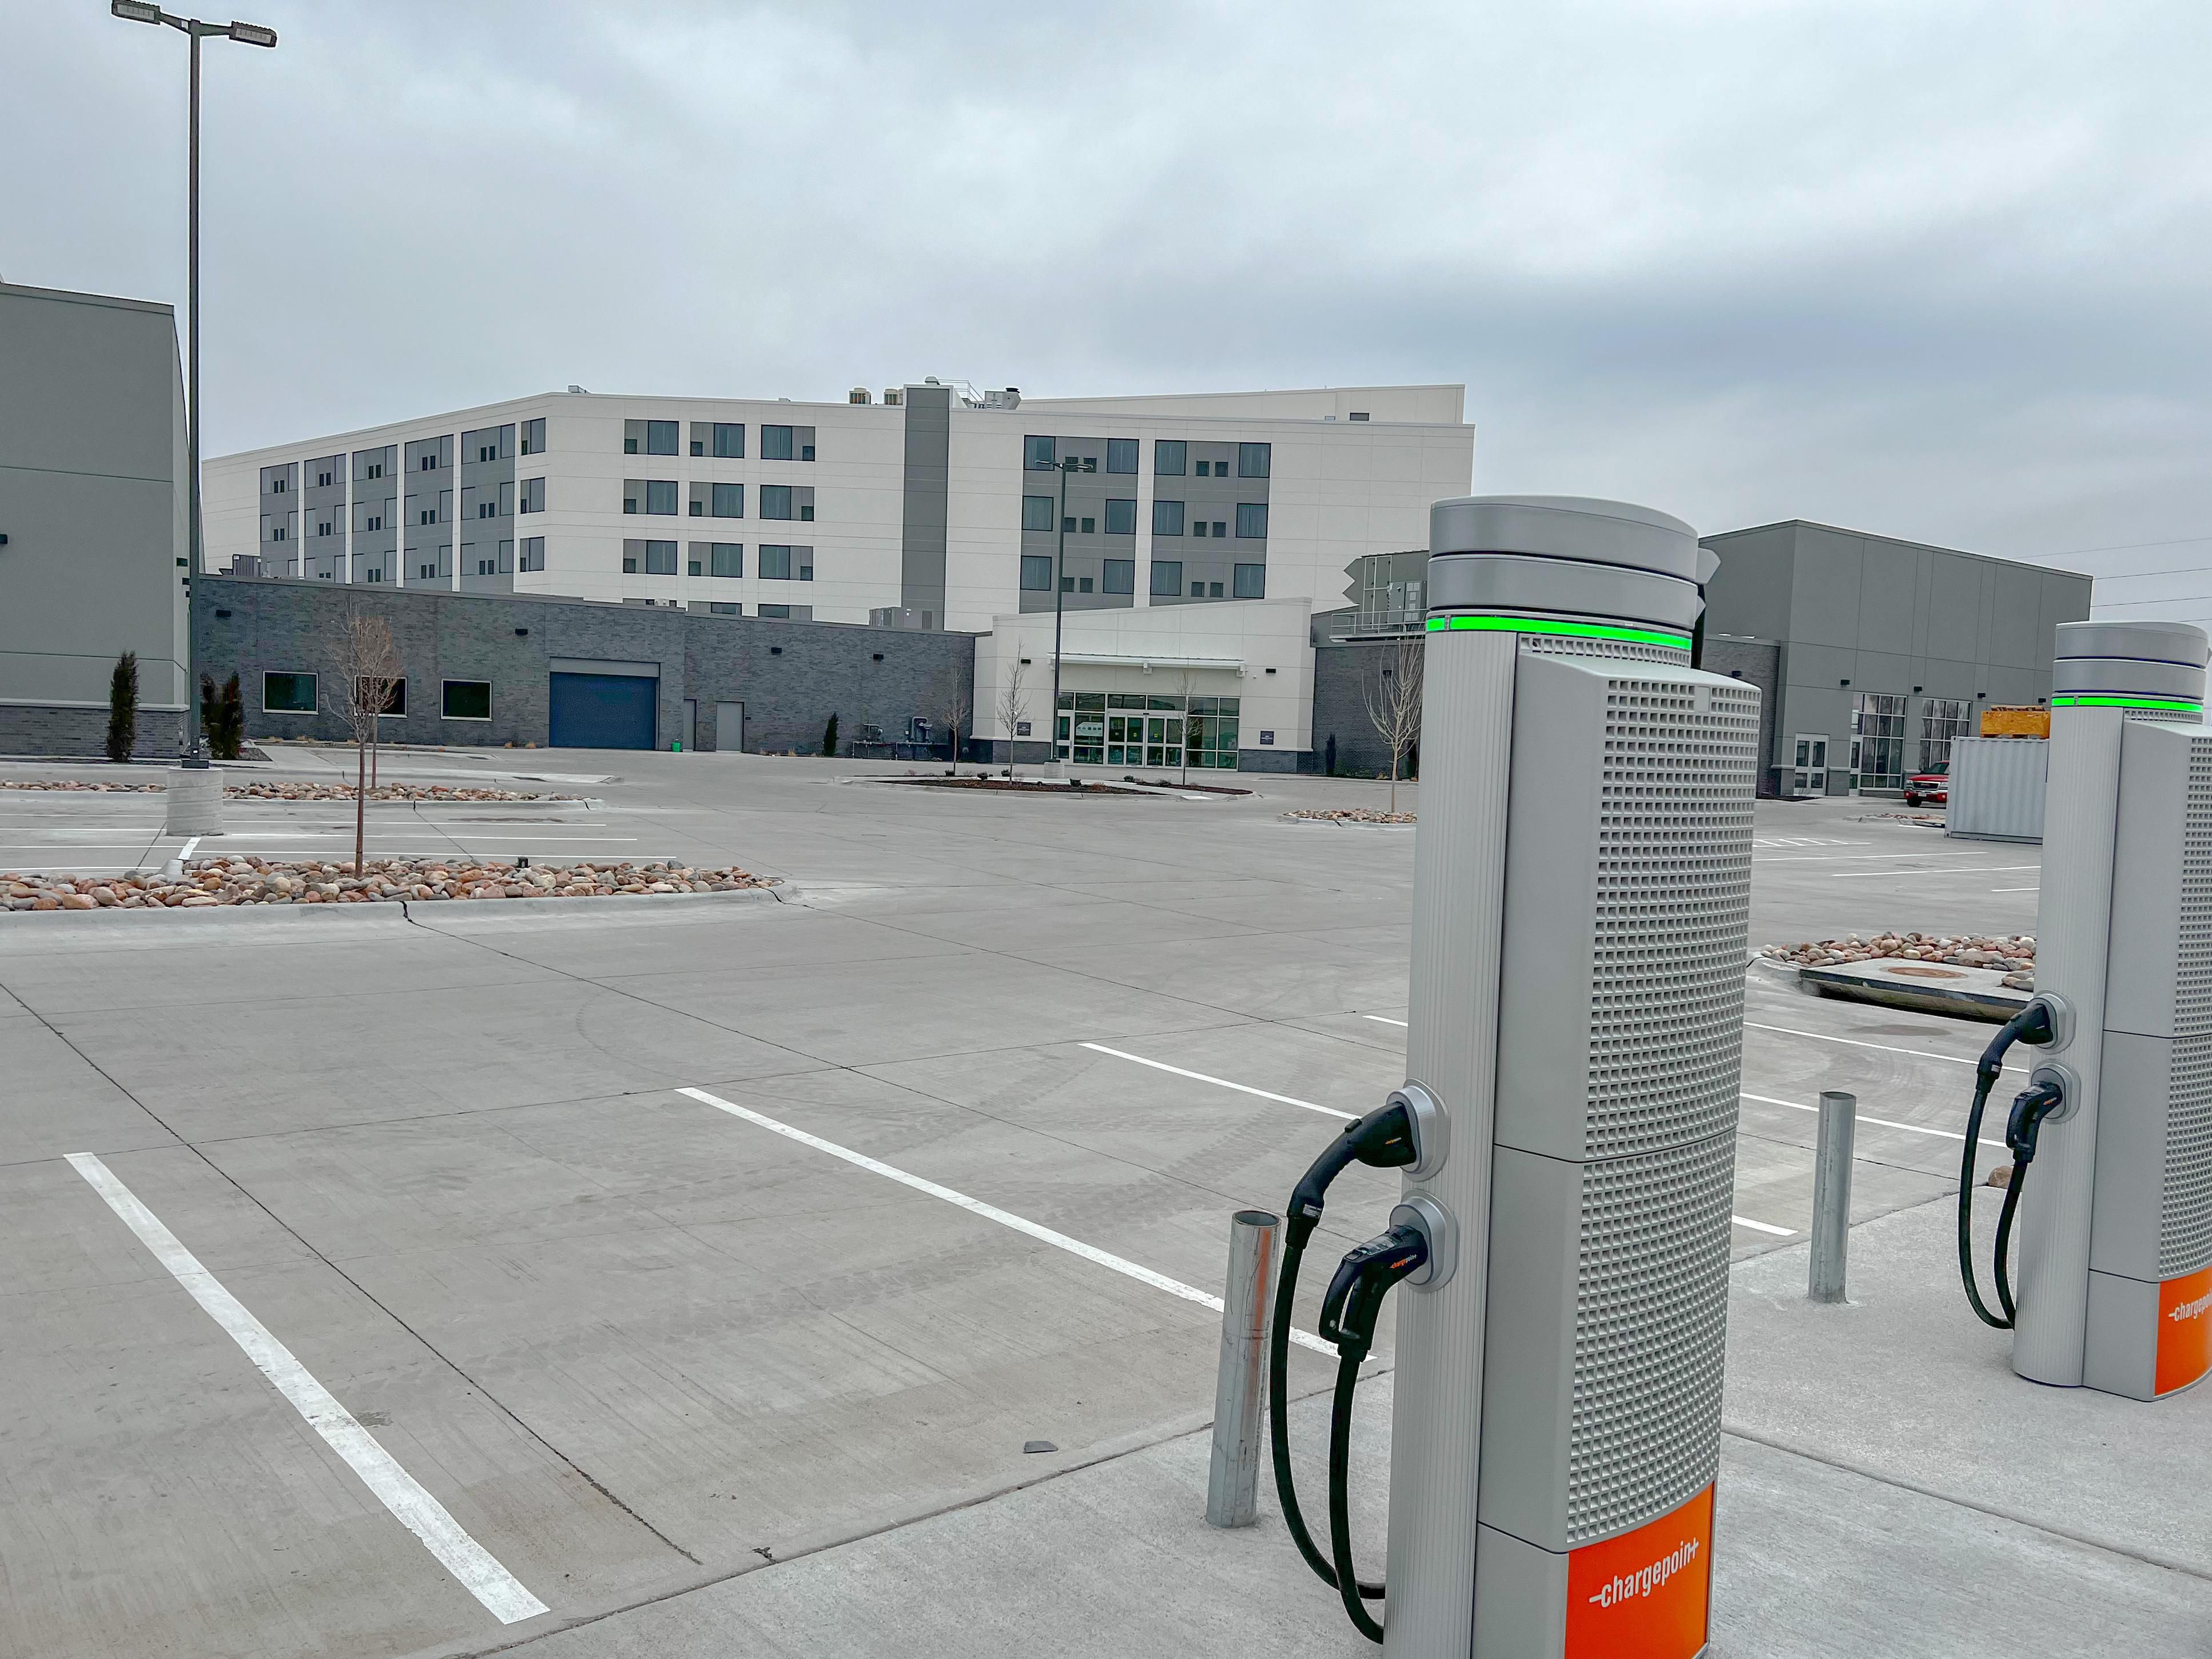 Driving an electric Vehicle? Visit one of our convenient electronic charging stations during your stay.